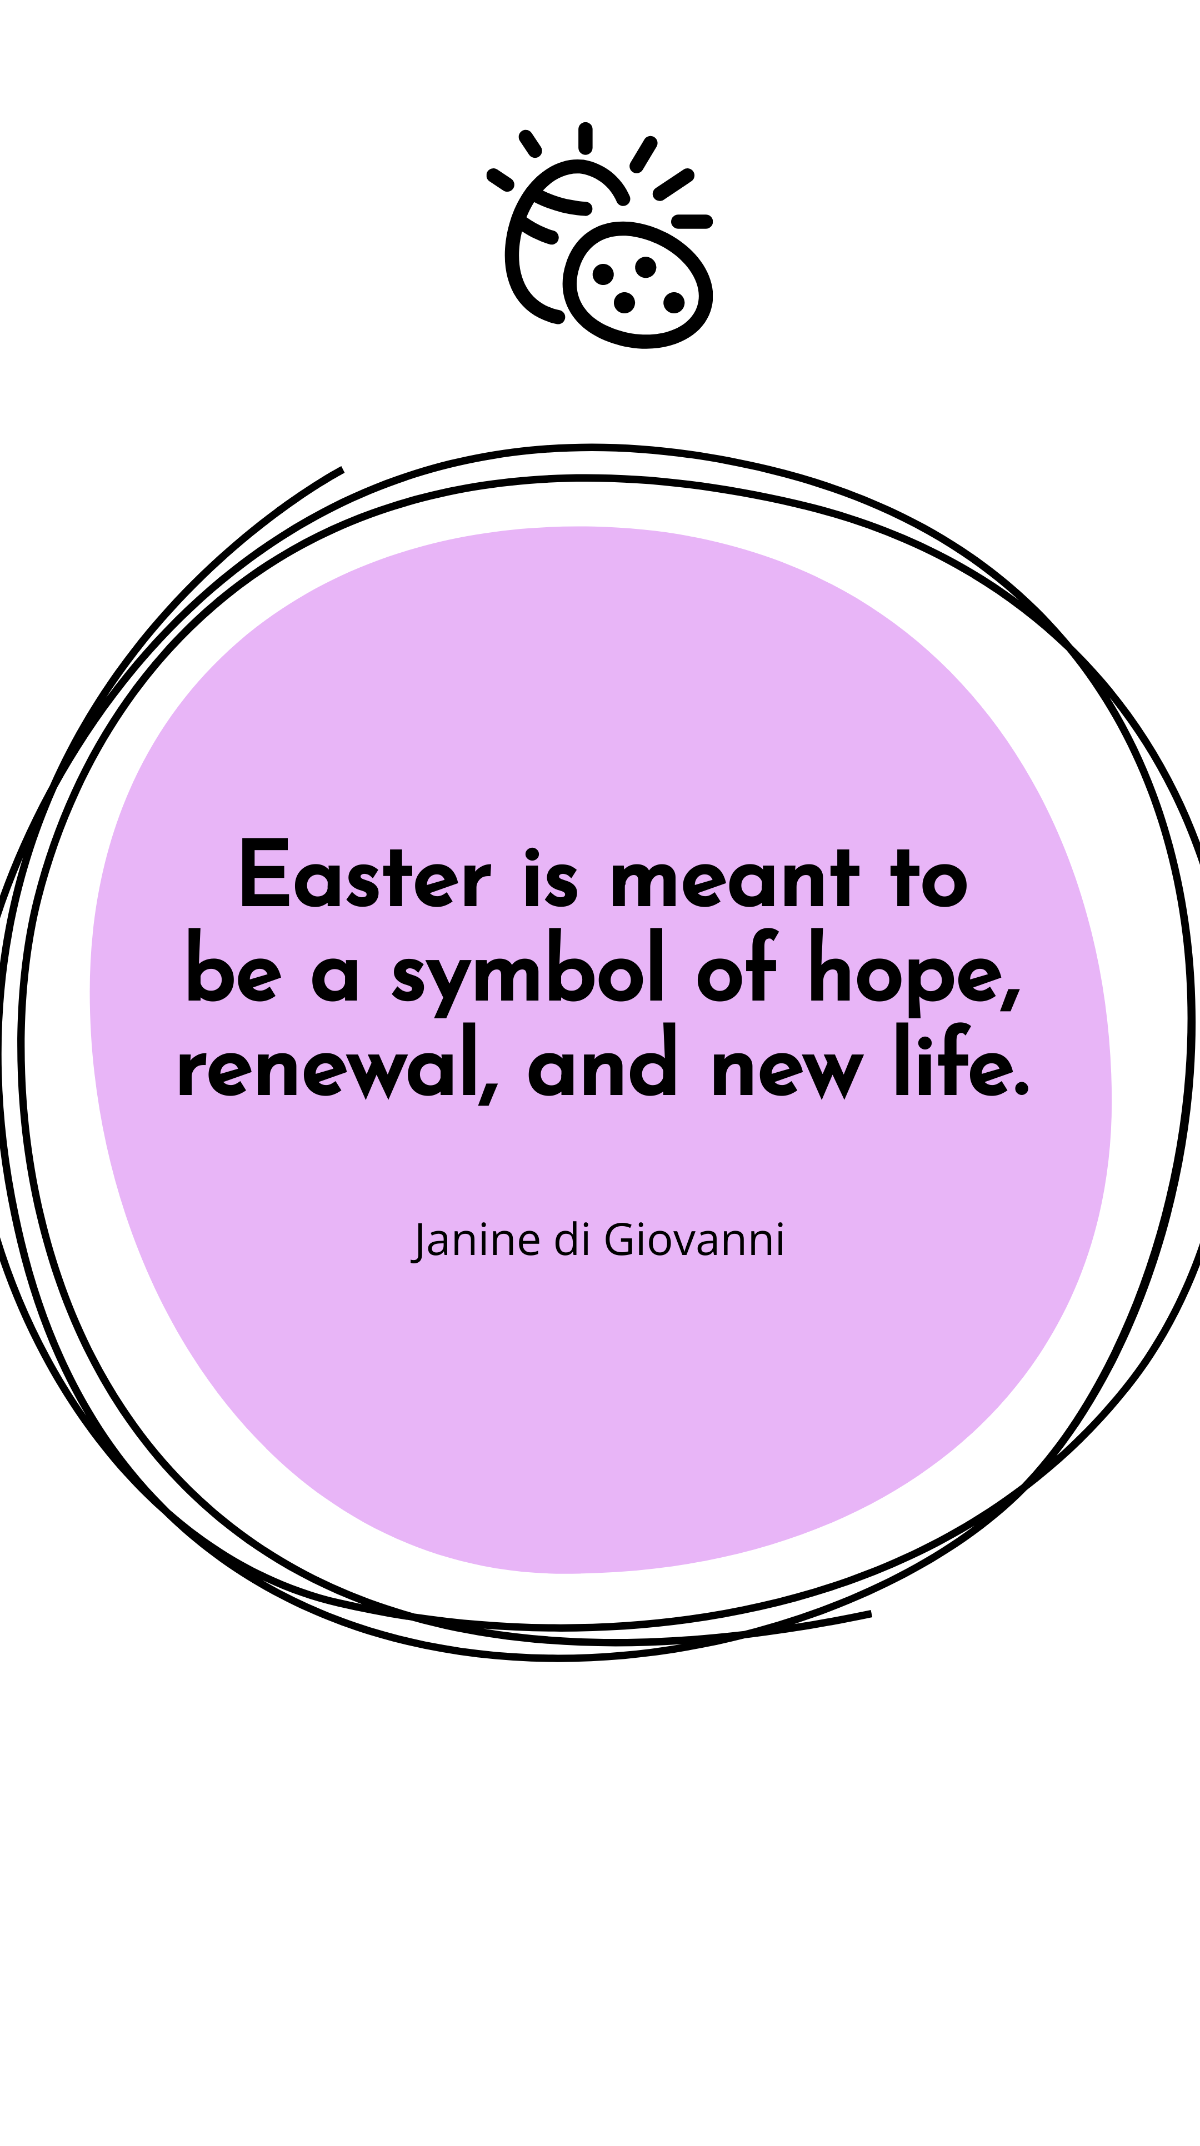 Janine di Giovanni - Easter is meant to be a symbol of hope, renewal, and new life. Template